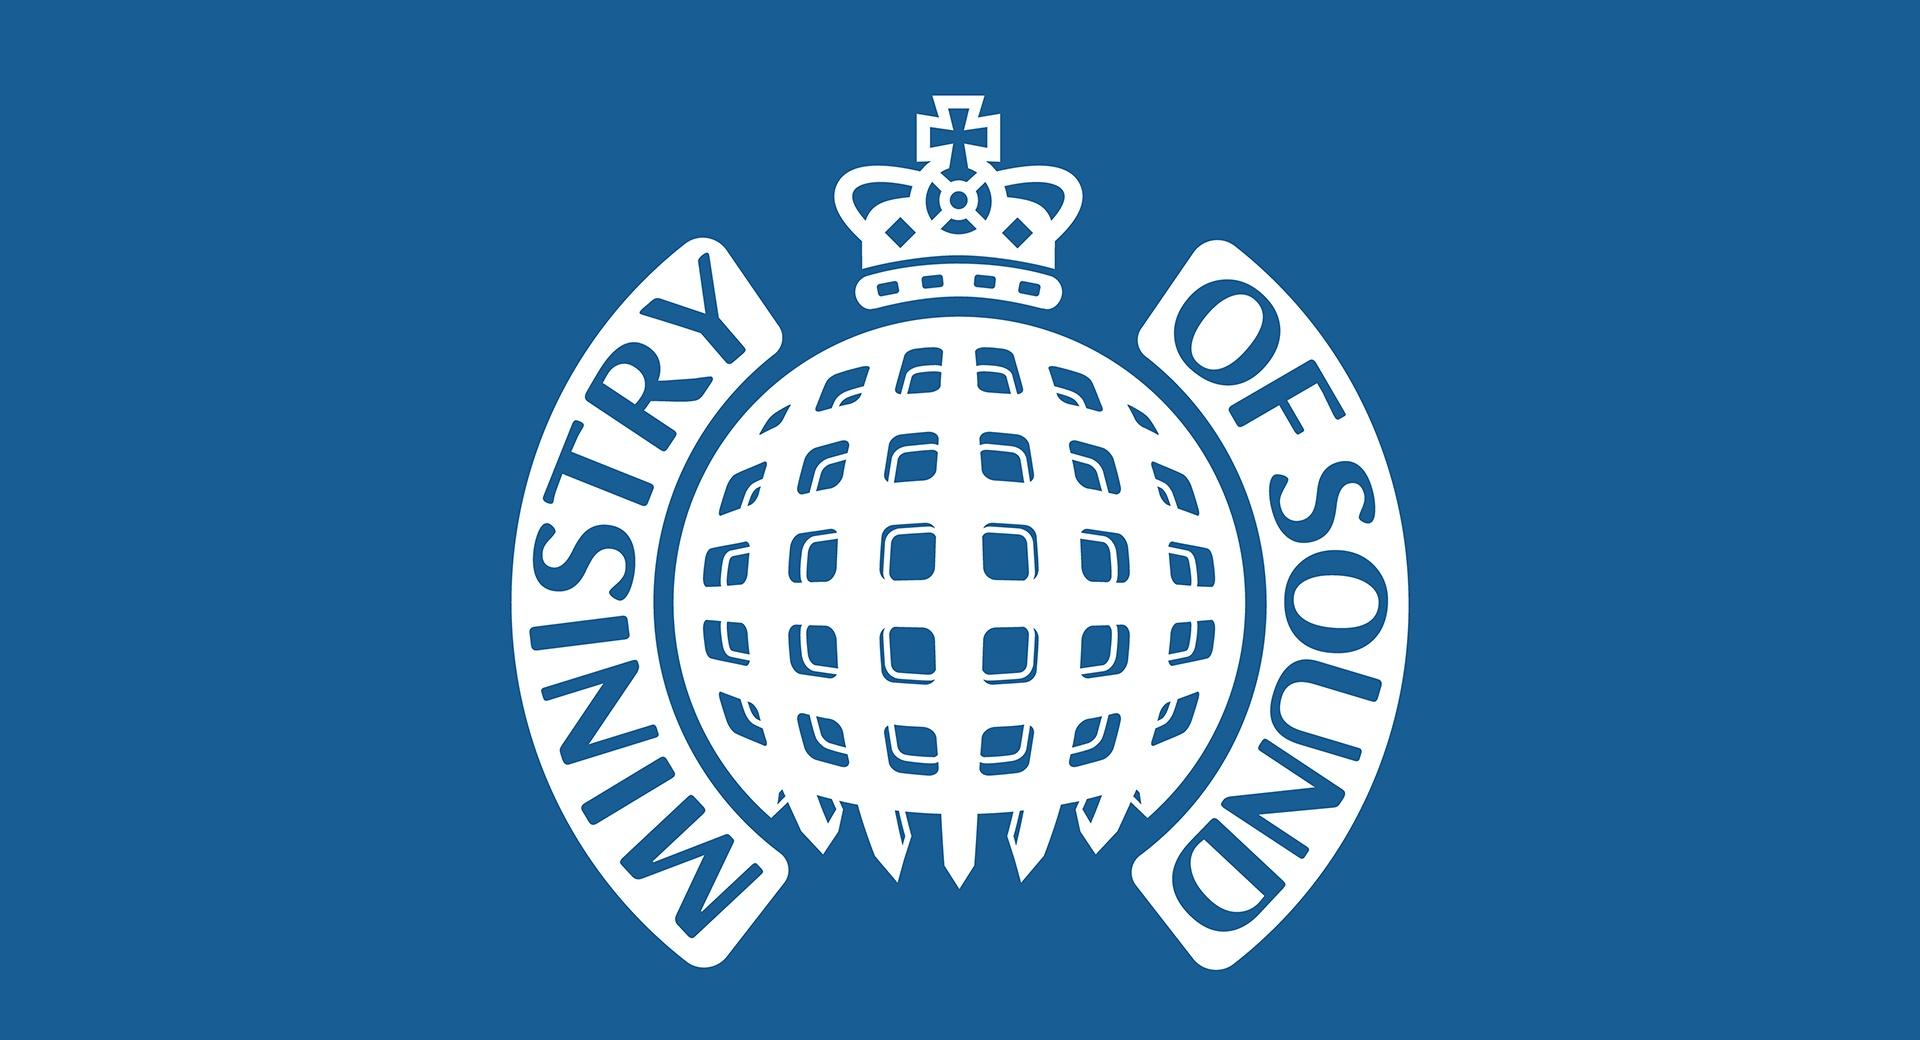 Ministry Of Sound wallpapers HD quality